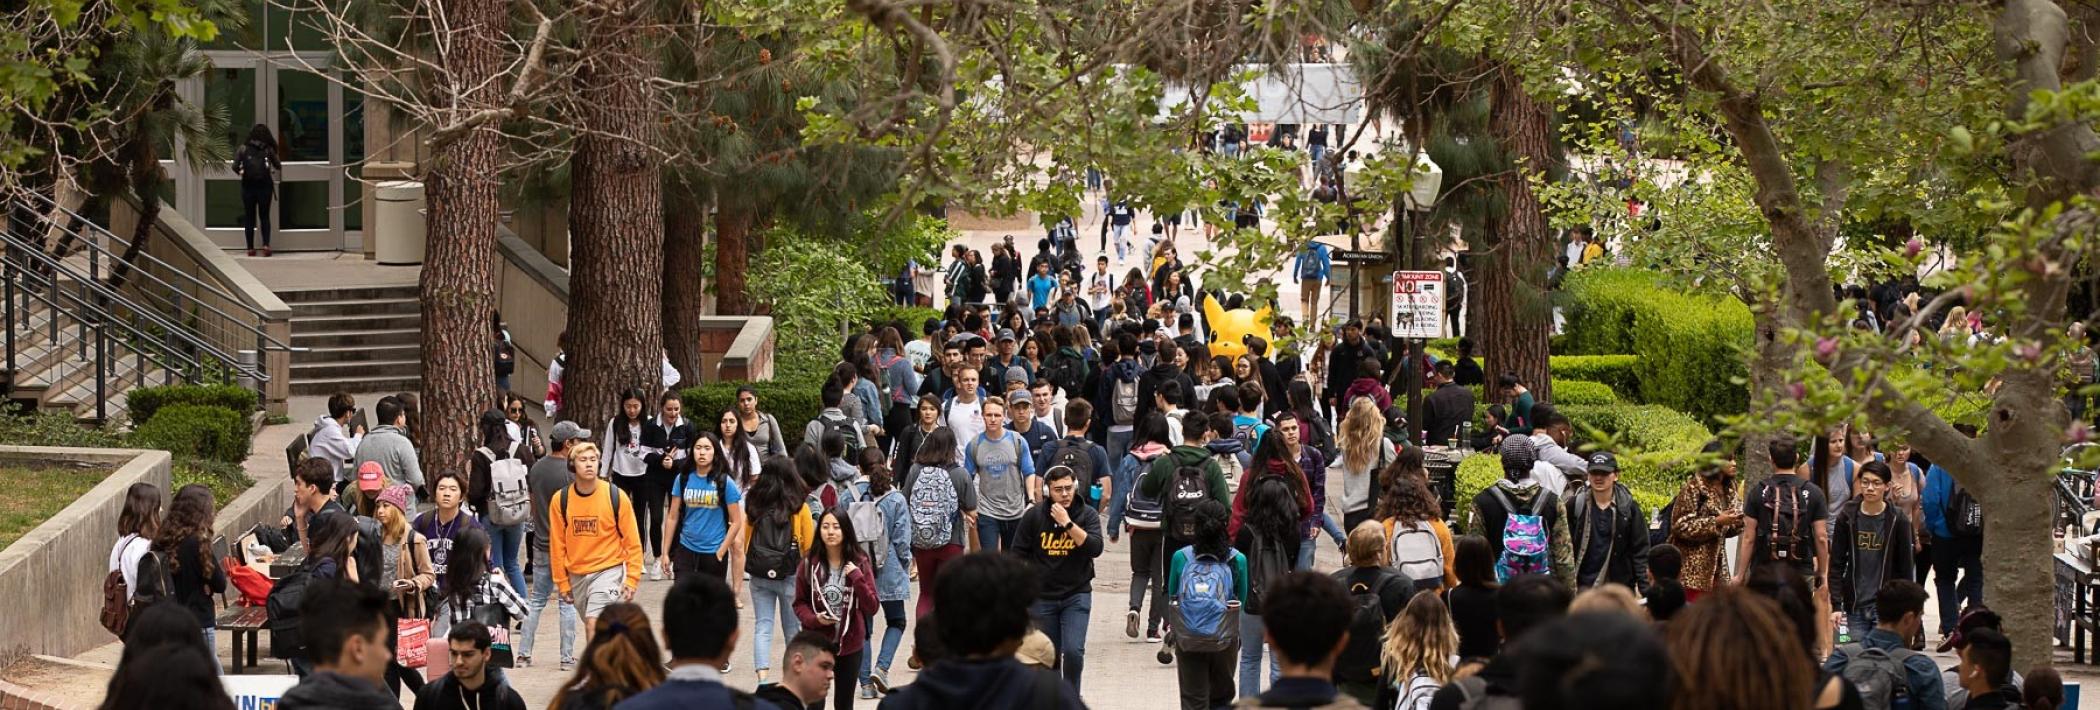 Bruin Walk pathway with many students walking